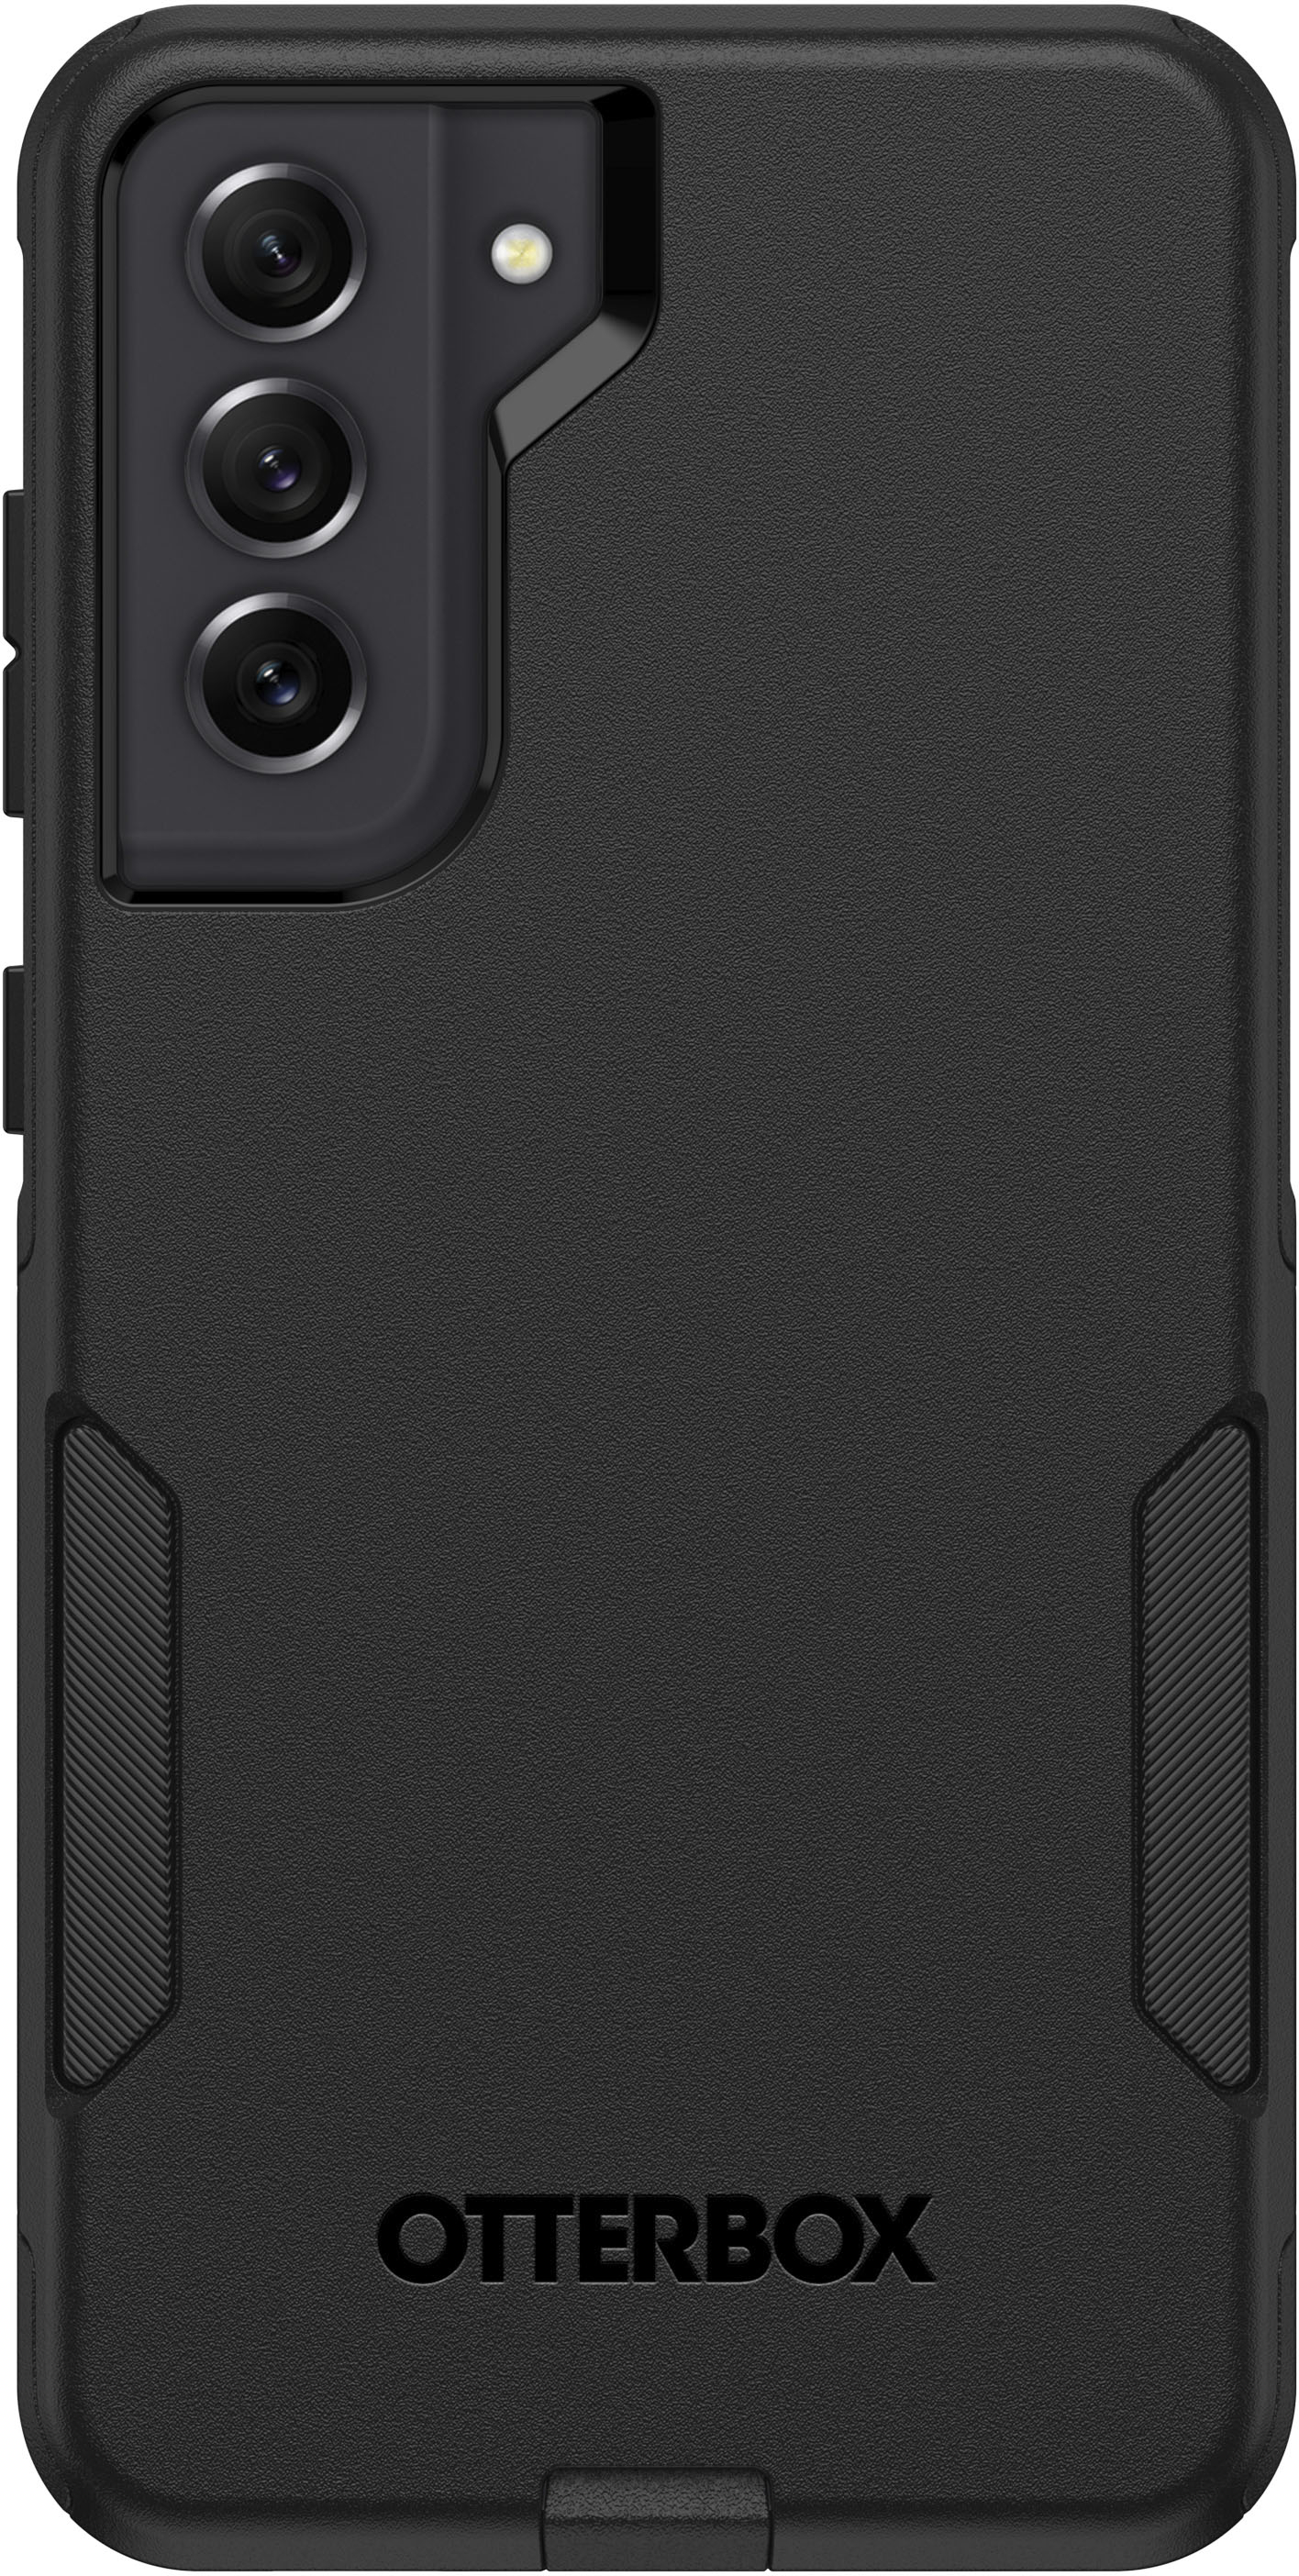 OtterBox Commuter Series Hard Shell for Samsung Galaxy S21 FE 5G Black  77-84122 - Best Buy